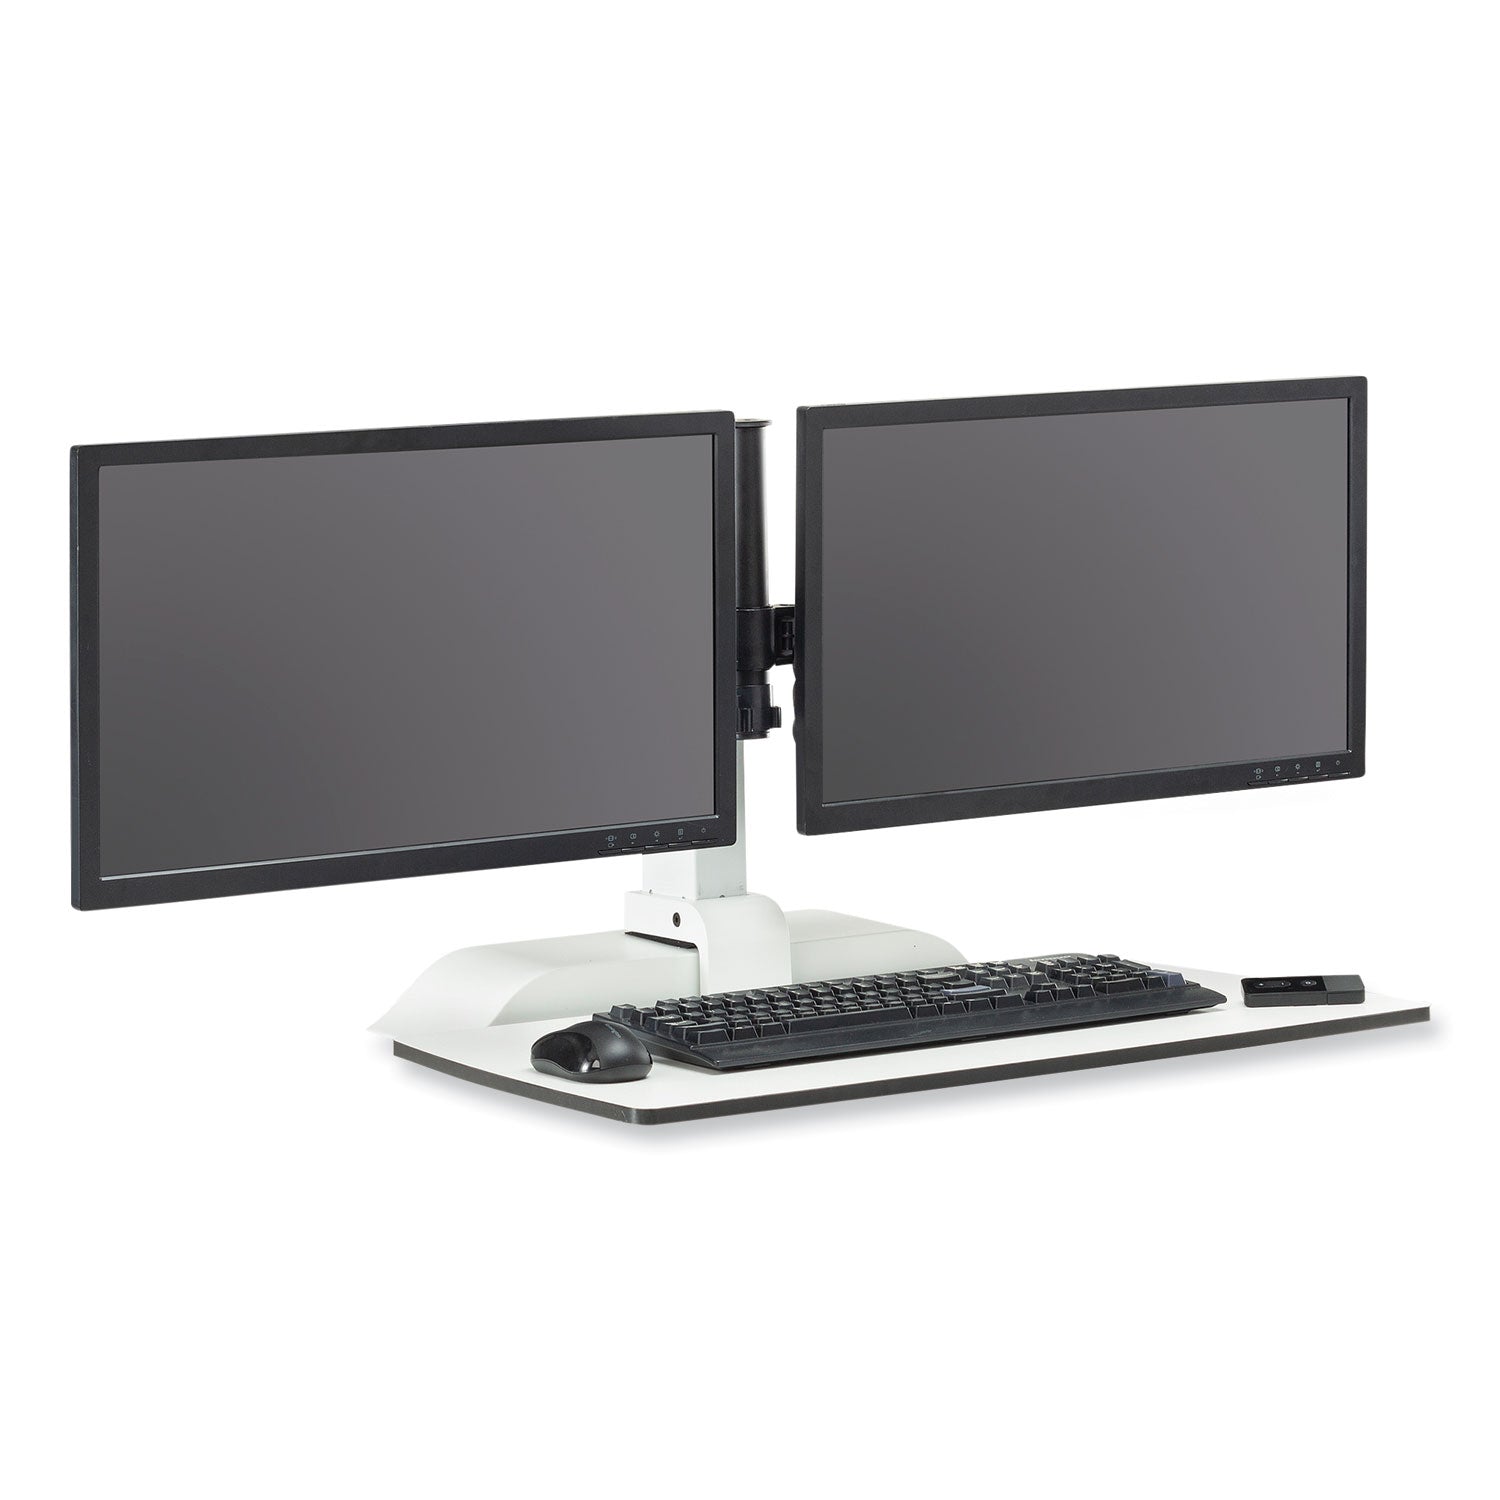 soar-electric-desktop-sit-stand-dual-monitor-arm-for-27-monitors-white-supports-10-lbs-ships-in-1-3-business-days_saf2193wh - 7